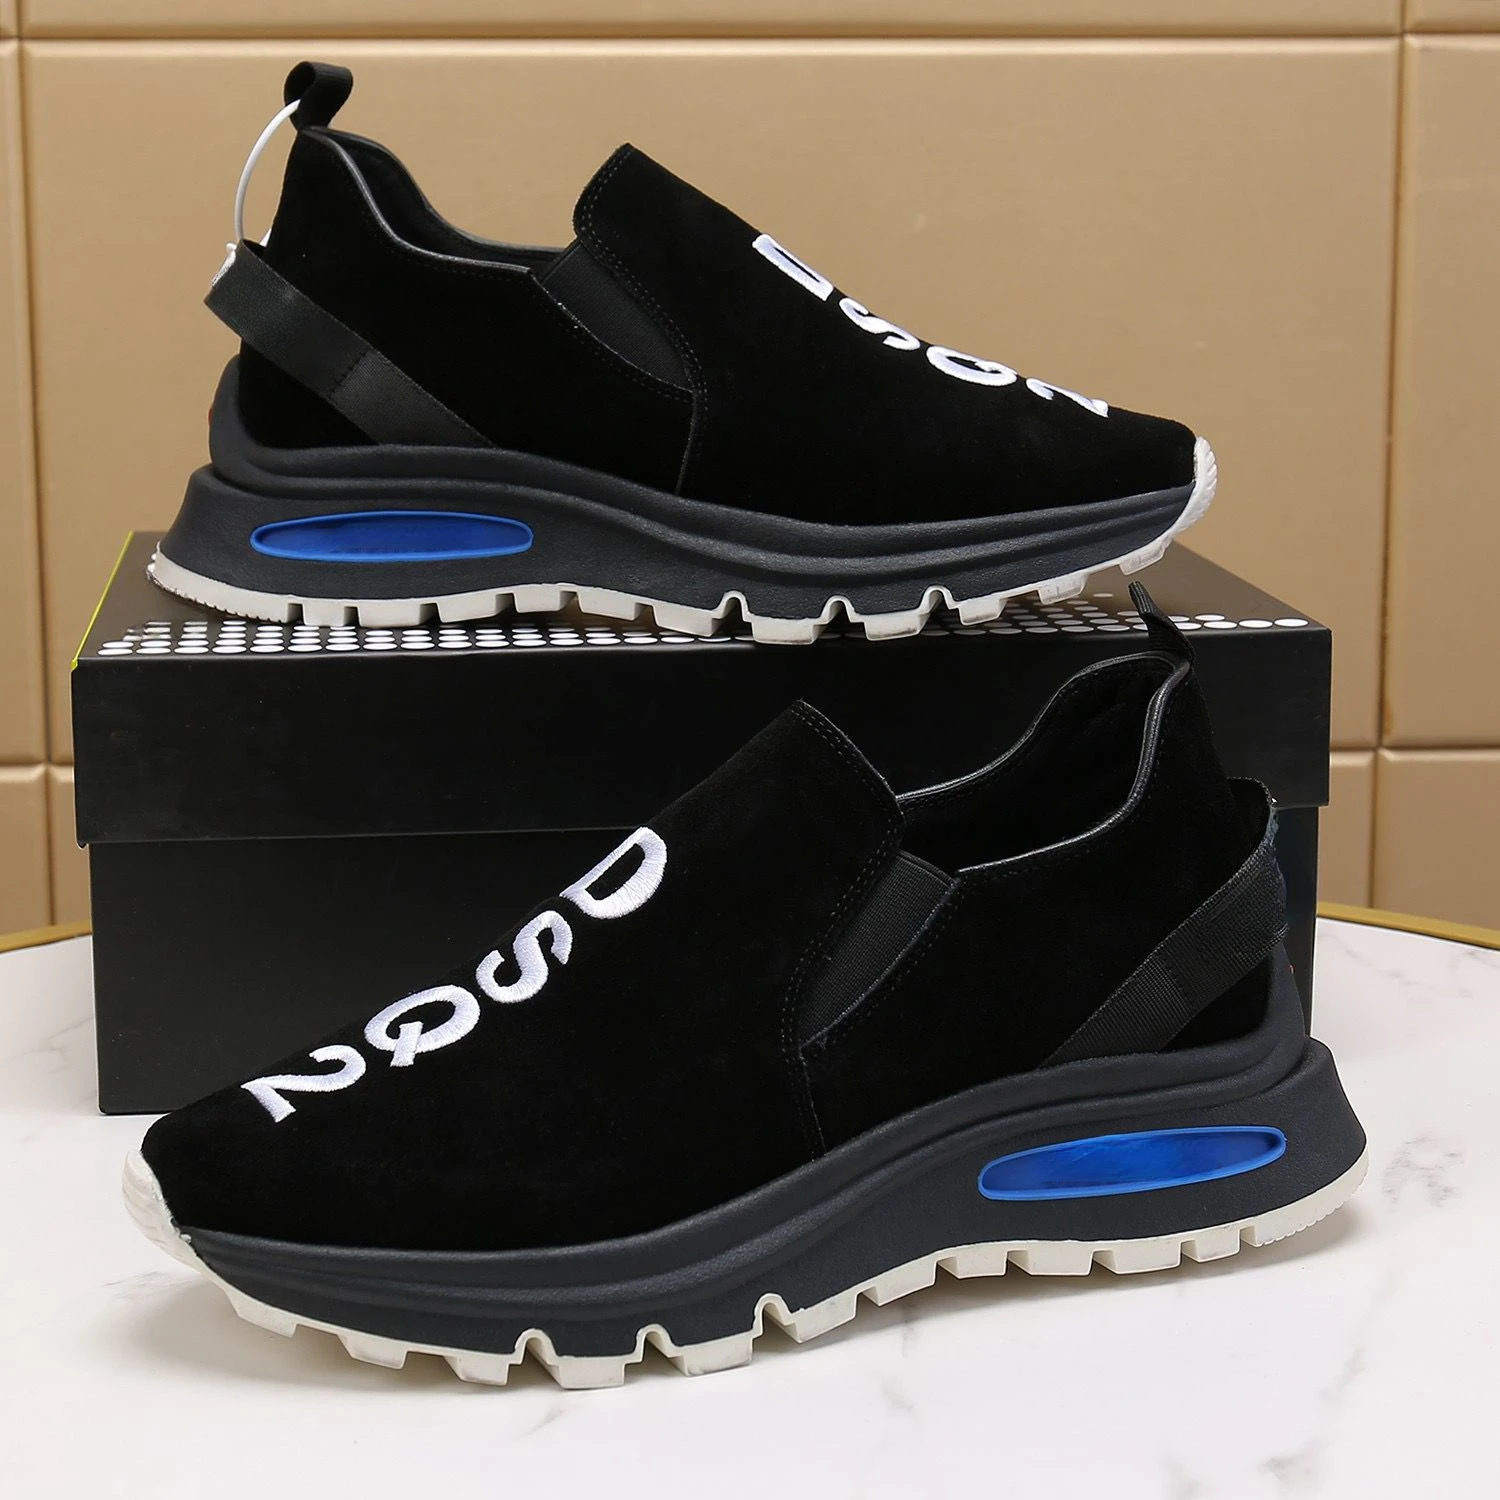 

2023 Men Italy Luxury Brand Embroidery DSQ2 Slip-on Casual Shoes Sneakers Dsq2 HEIGHT INCREASING Outwear Tenis Masculino